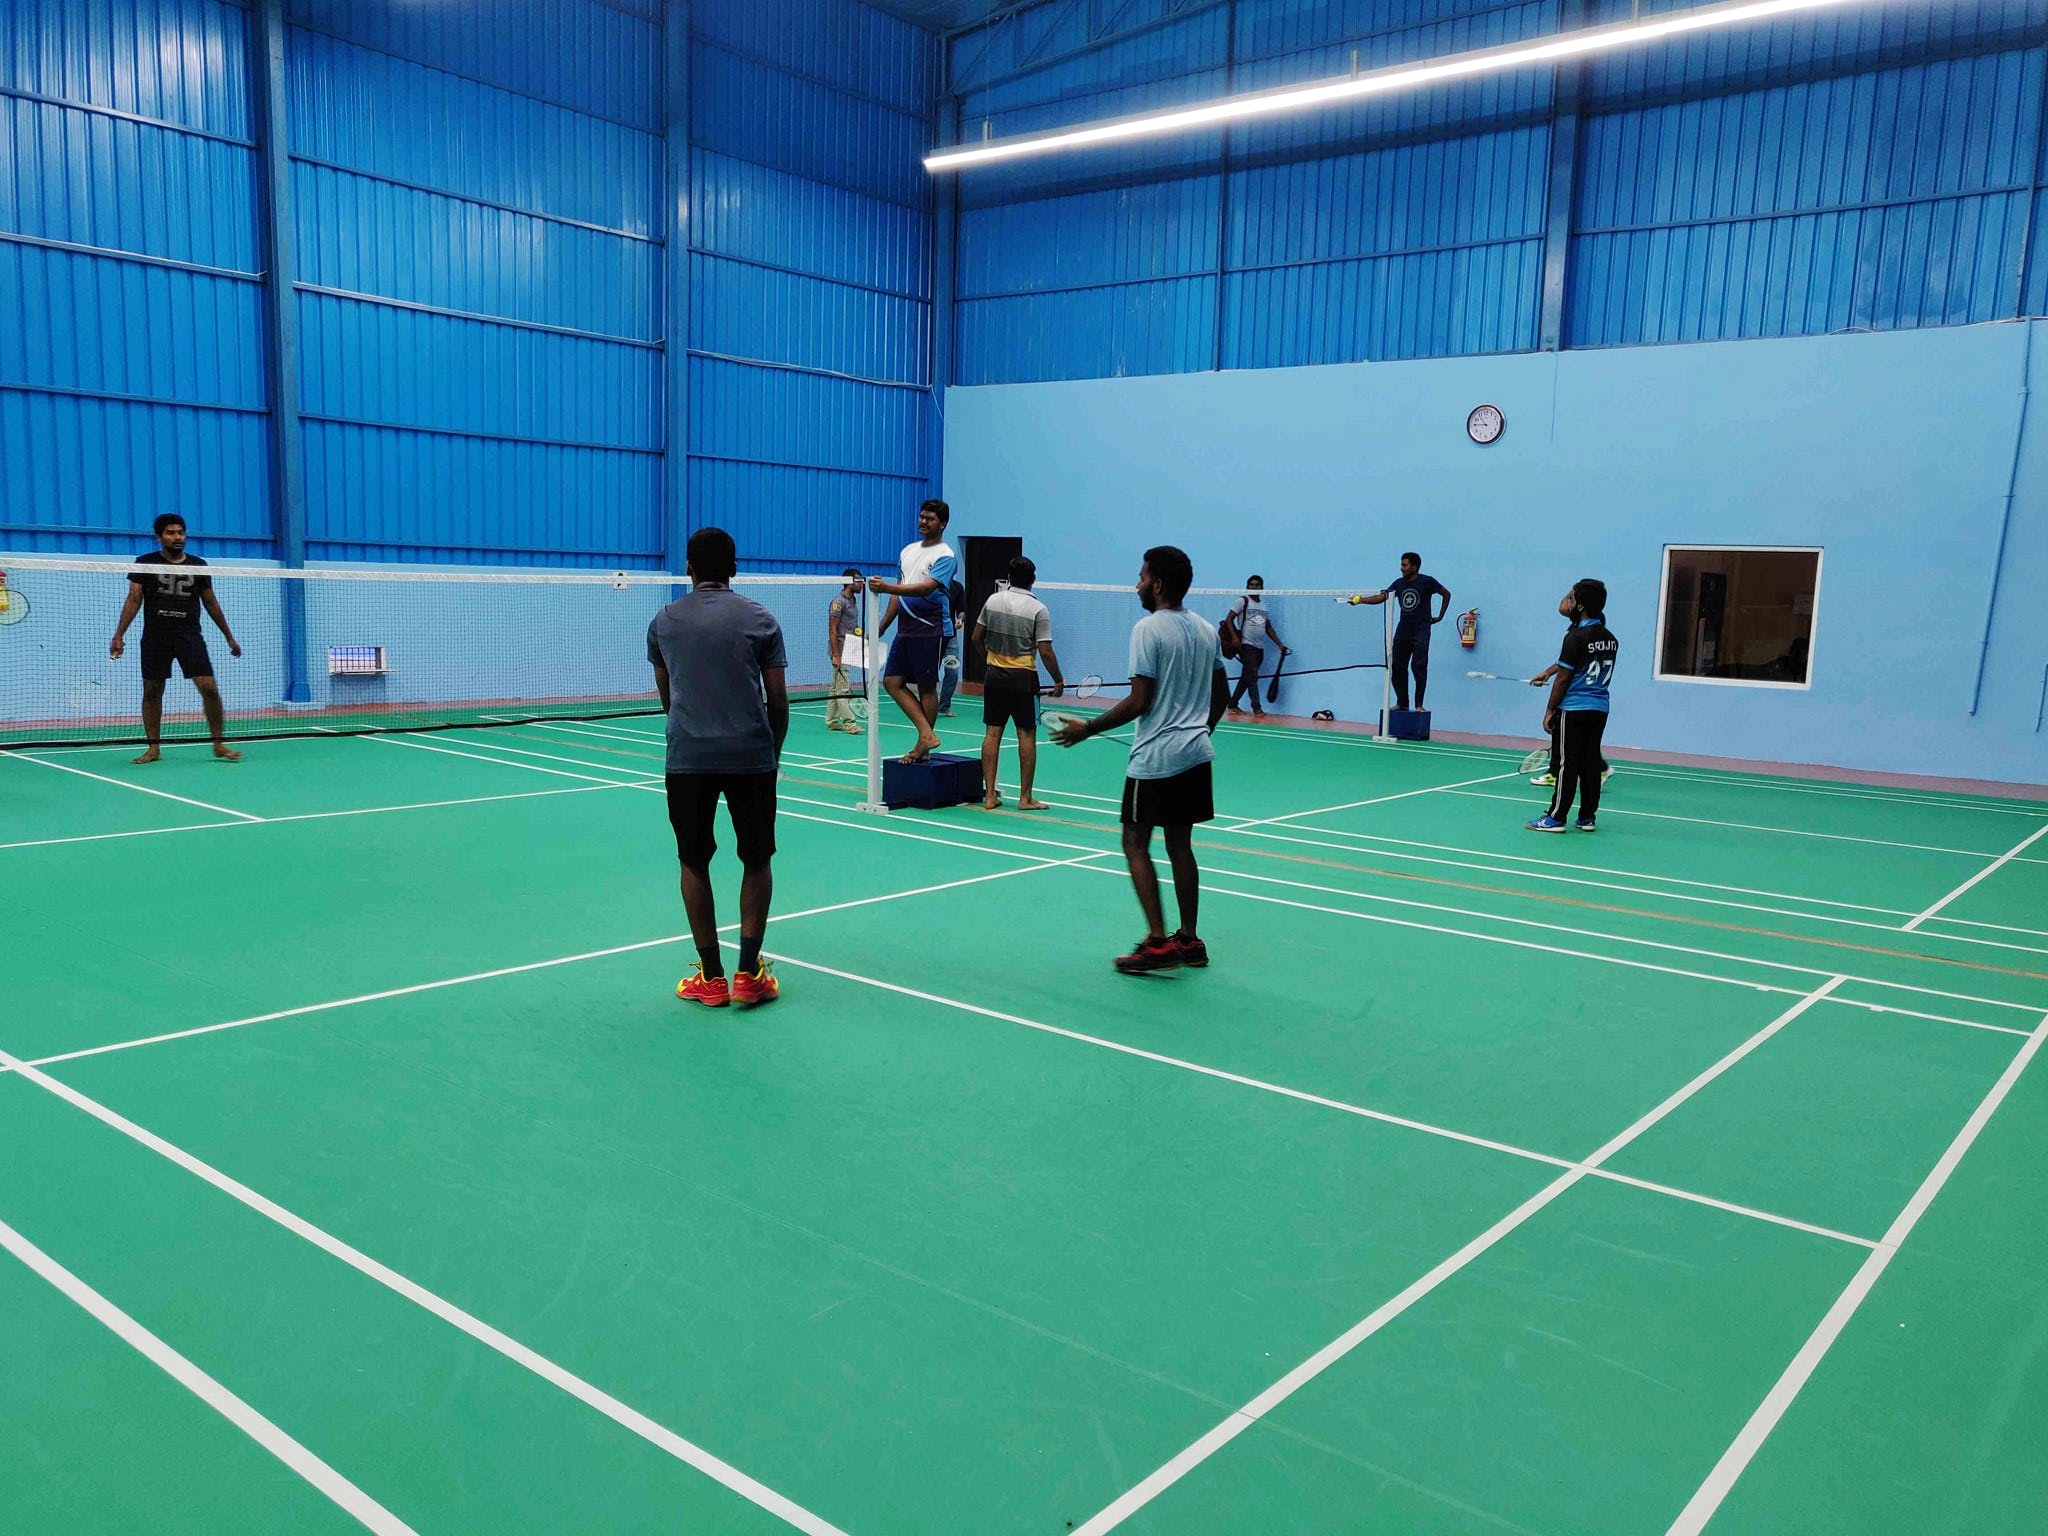 Sports,Team sport,Ball game,Sport venue,Sports training,Player,Leisure centre,Sports equipment,Recreation,Competition event